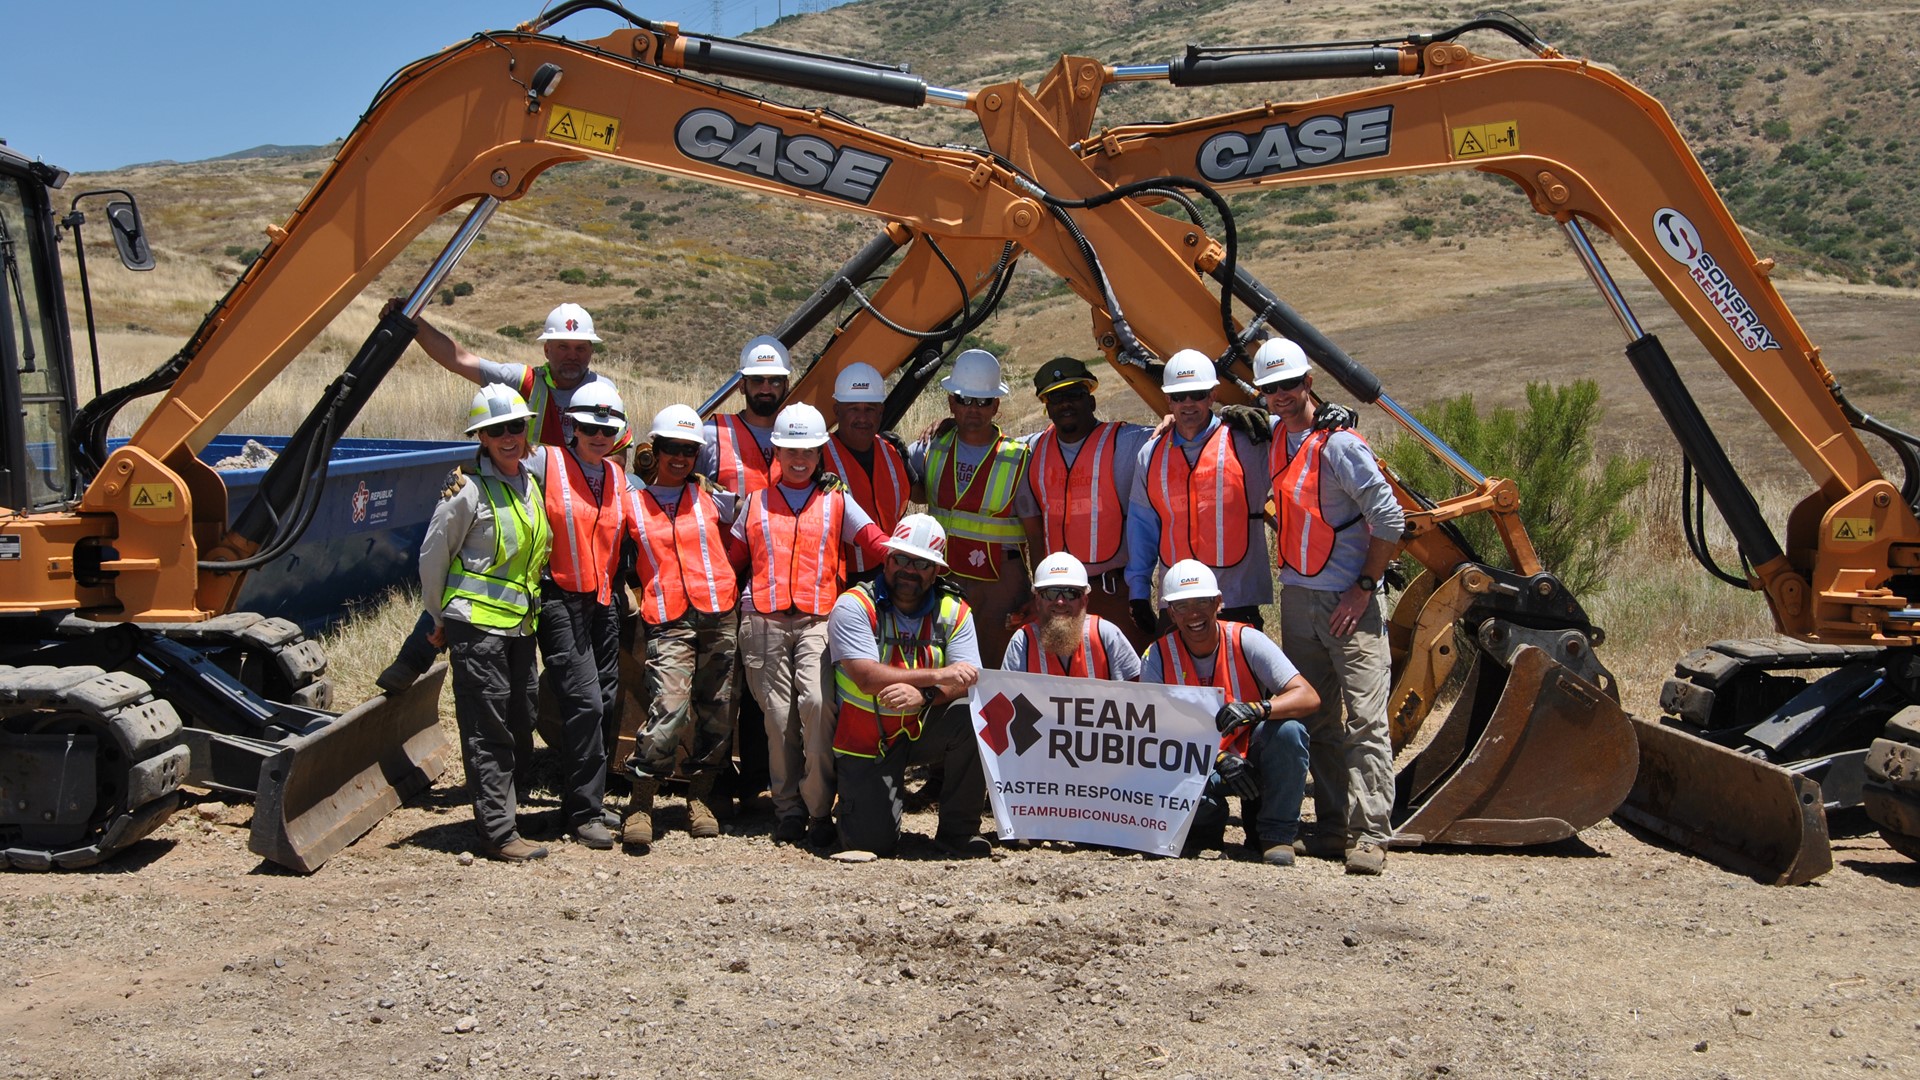 CASE, Sonsray Machinery, Team Rubicon and the U.S. Fish & Wildlife Service join forces